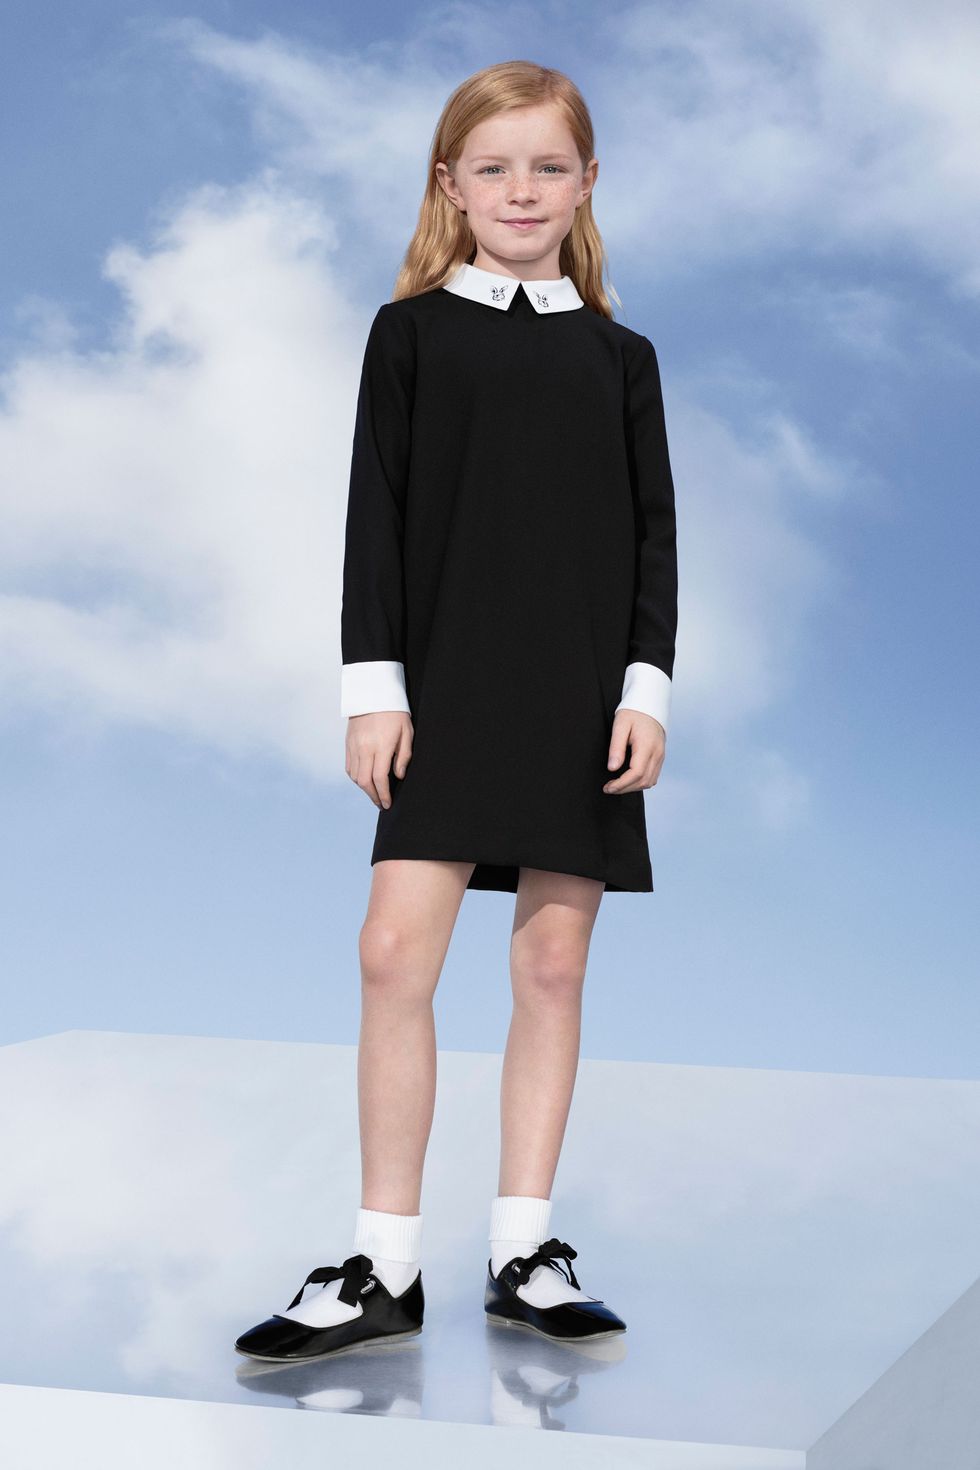 Victoria Beckham for Target complete collection pictures